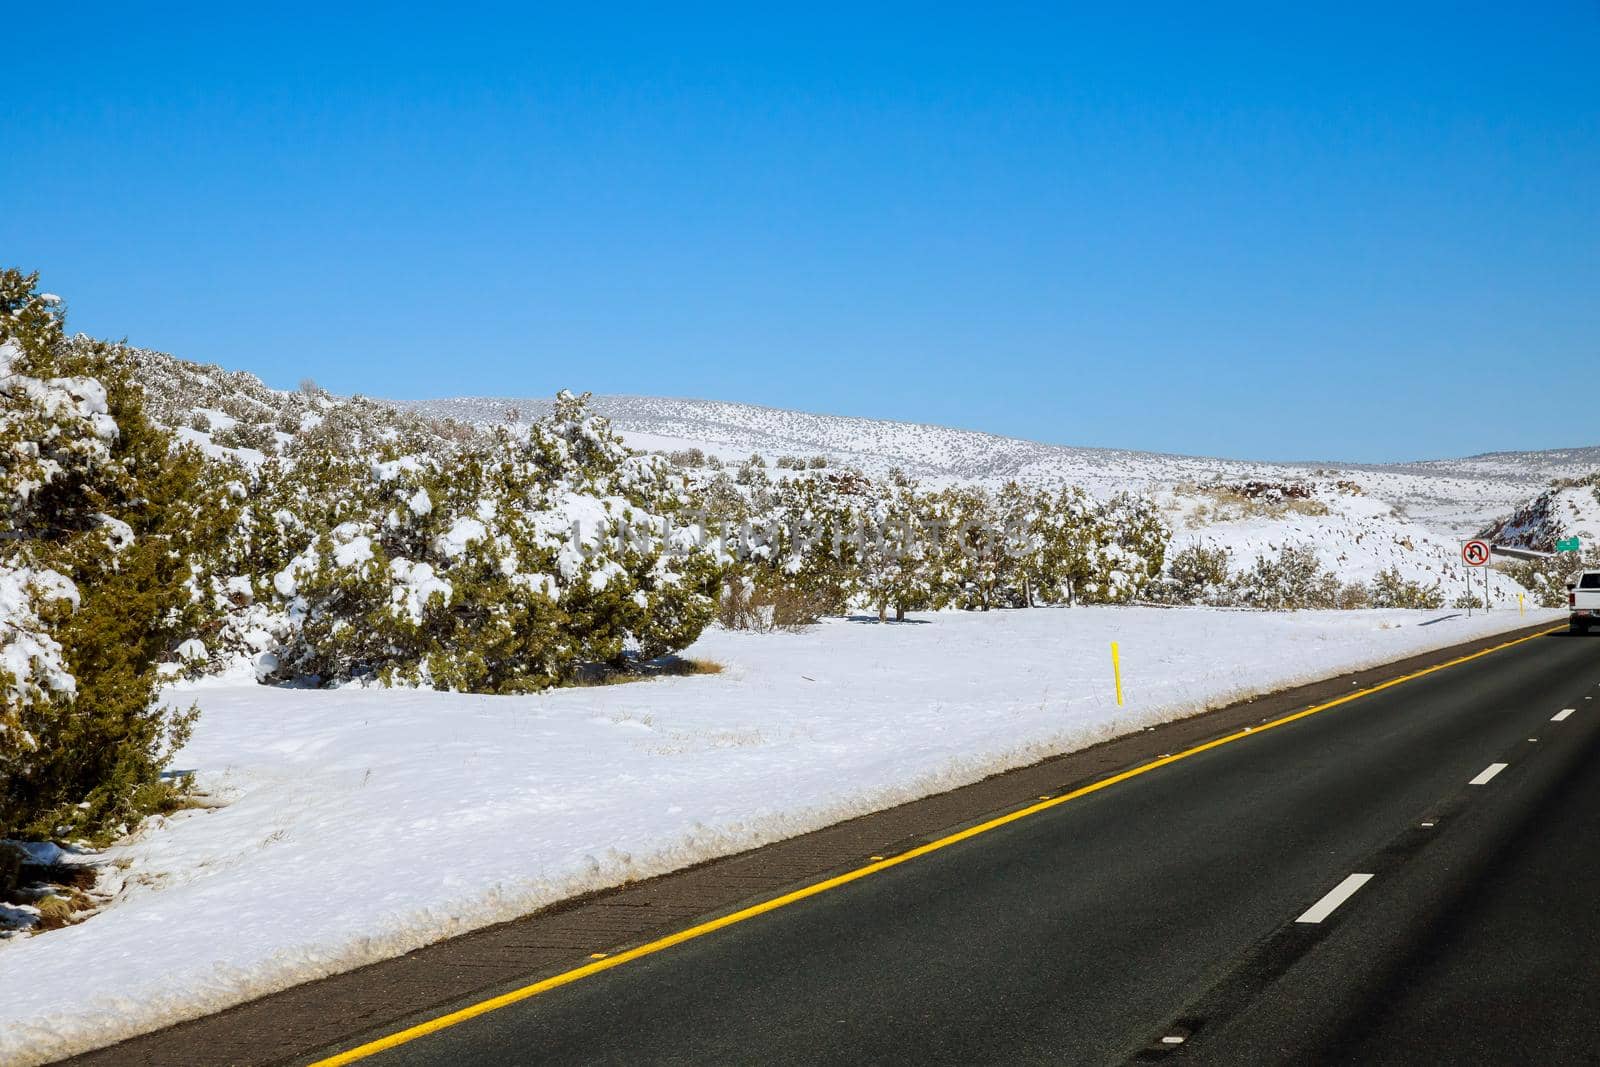 The scenery of a valley after a snowstorm, trees forest snowy road of Interstate 17 in Arizona USA